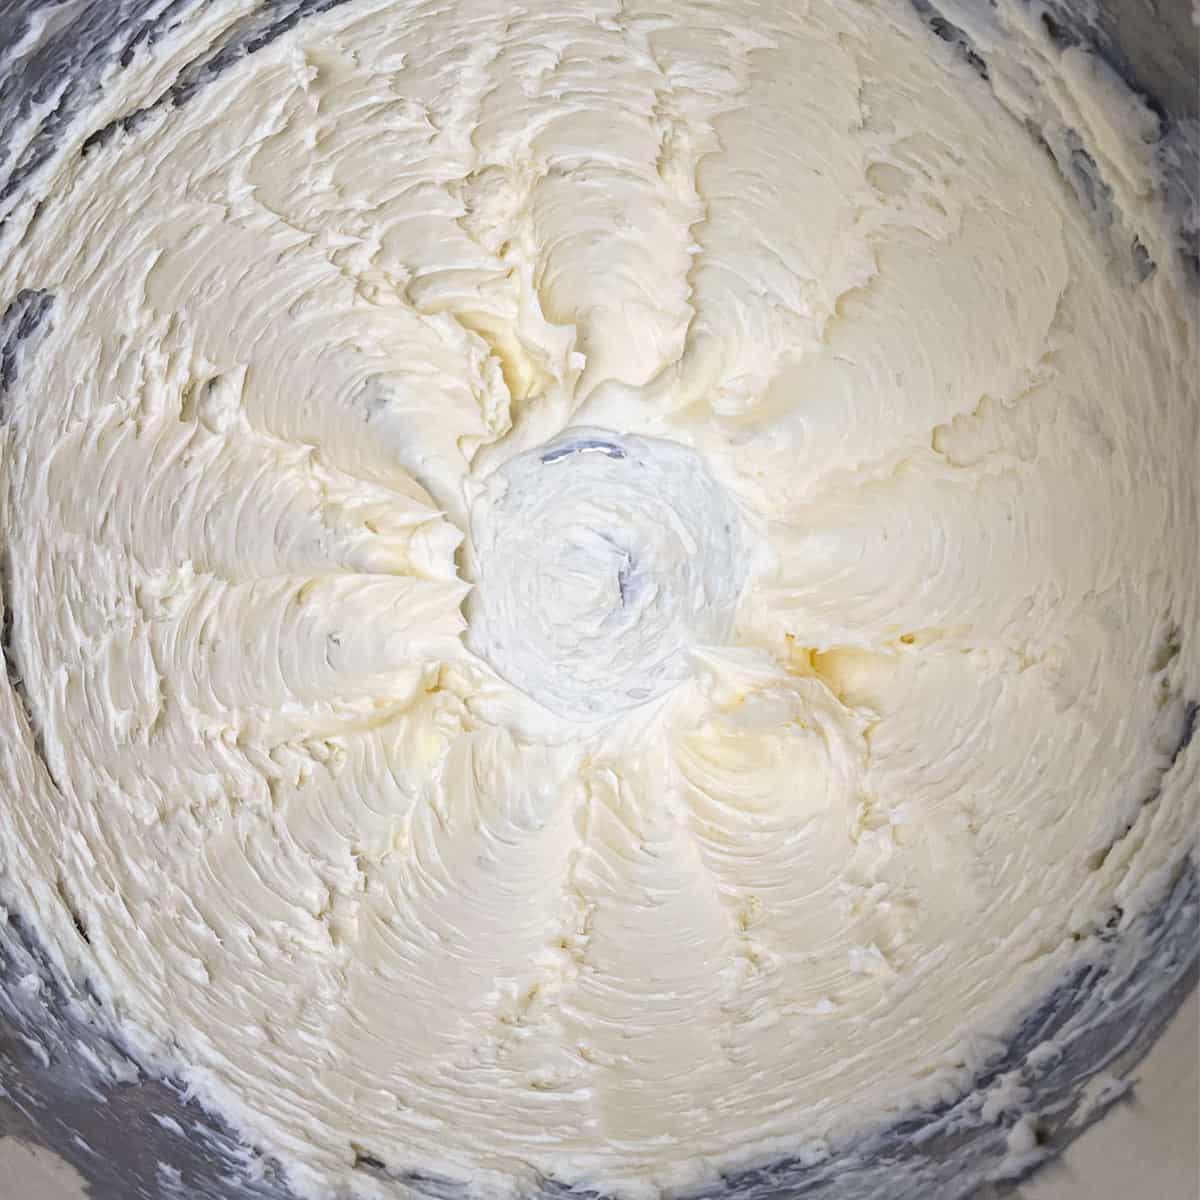 Butter that has been creamed in a mixer bowl.